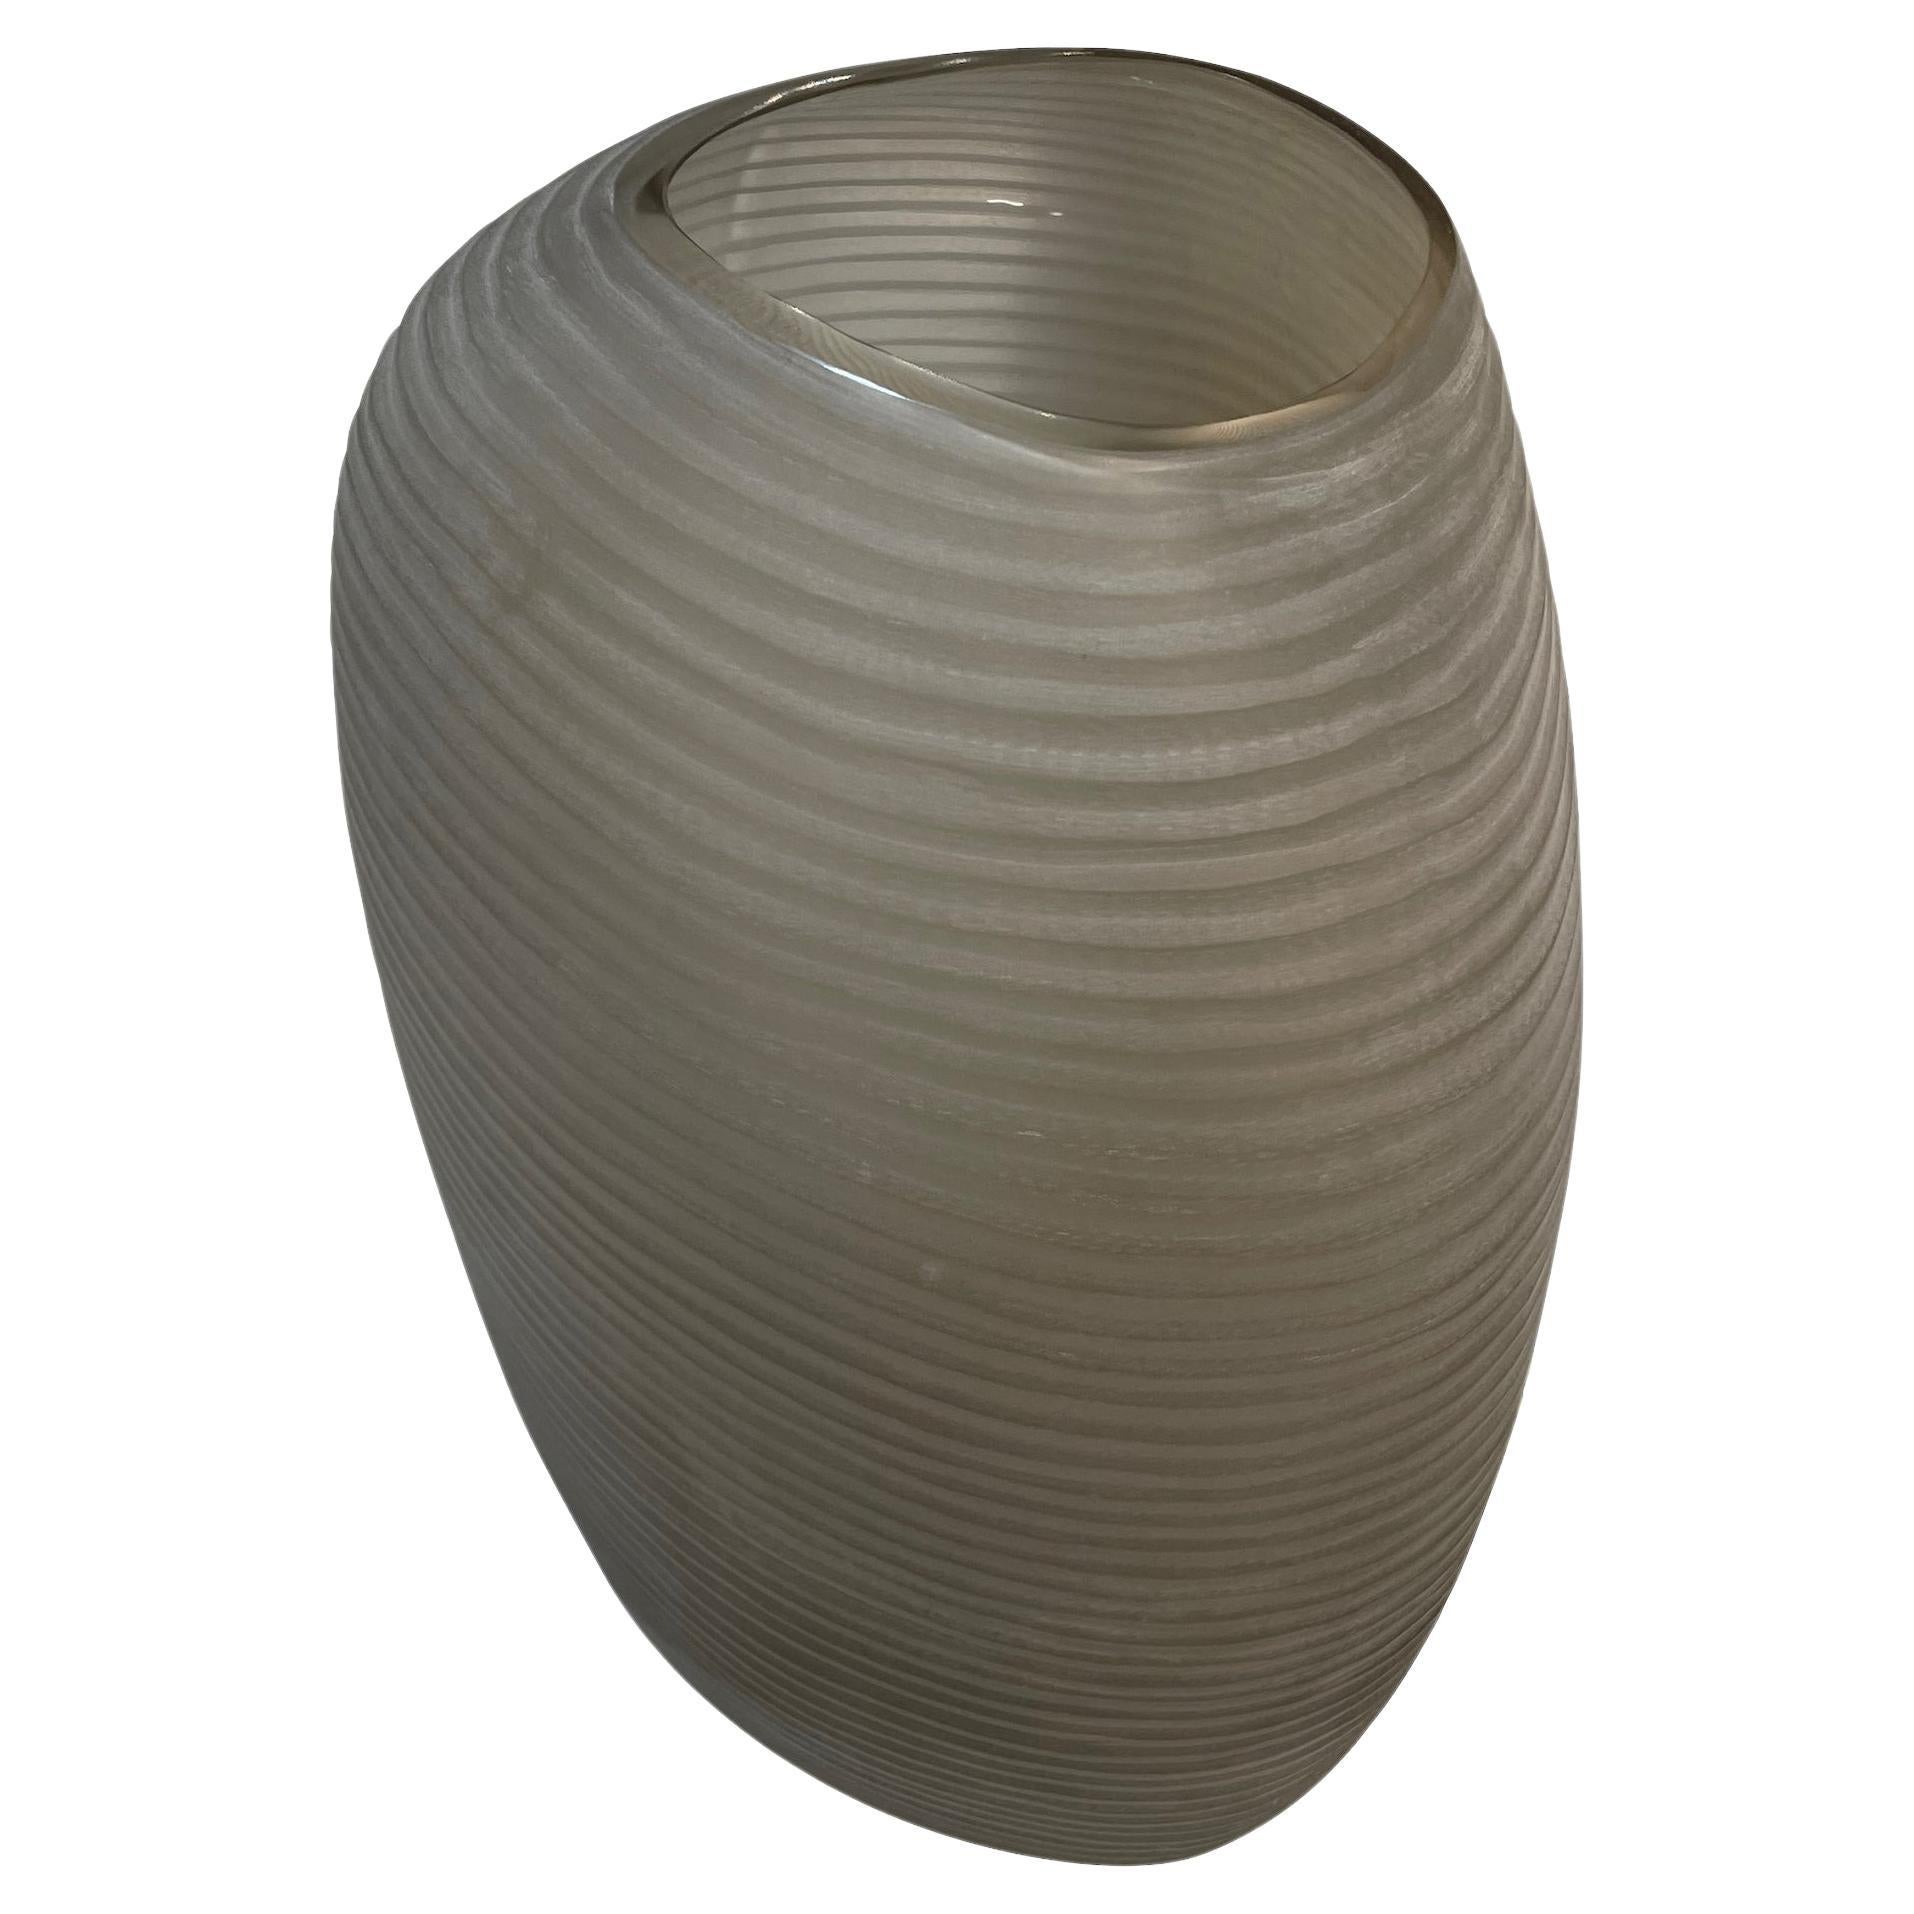 Contemporary Romanian frosted tan glass vase with horizontal ribbed design.
Can hold water.
From a collection of five frosted tan glass vases.